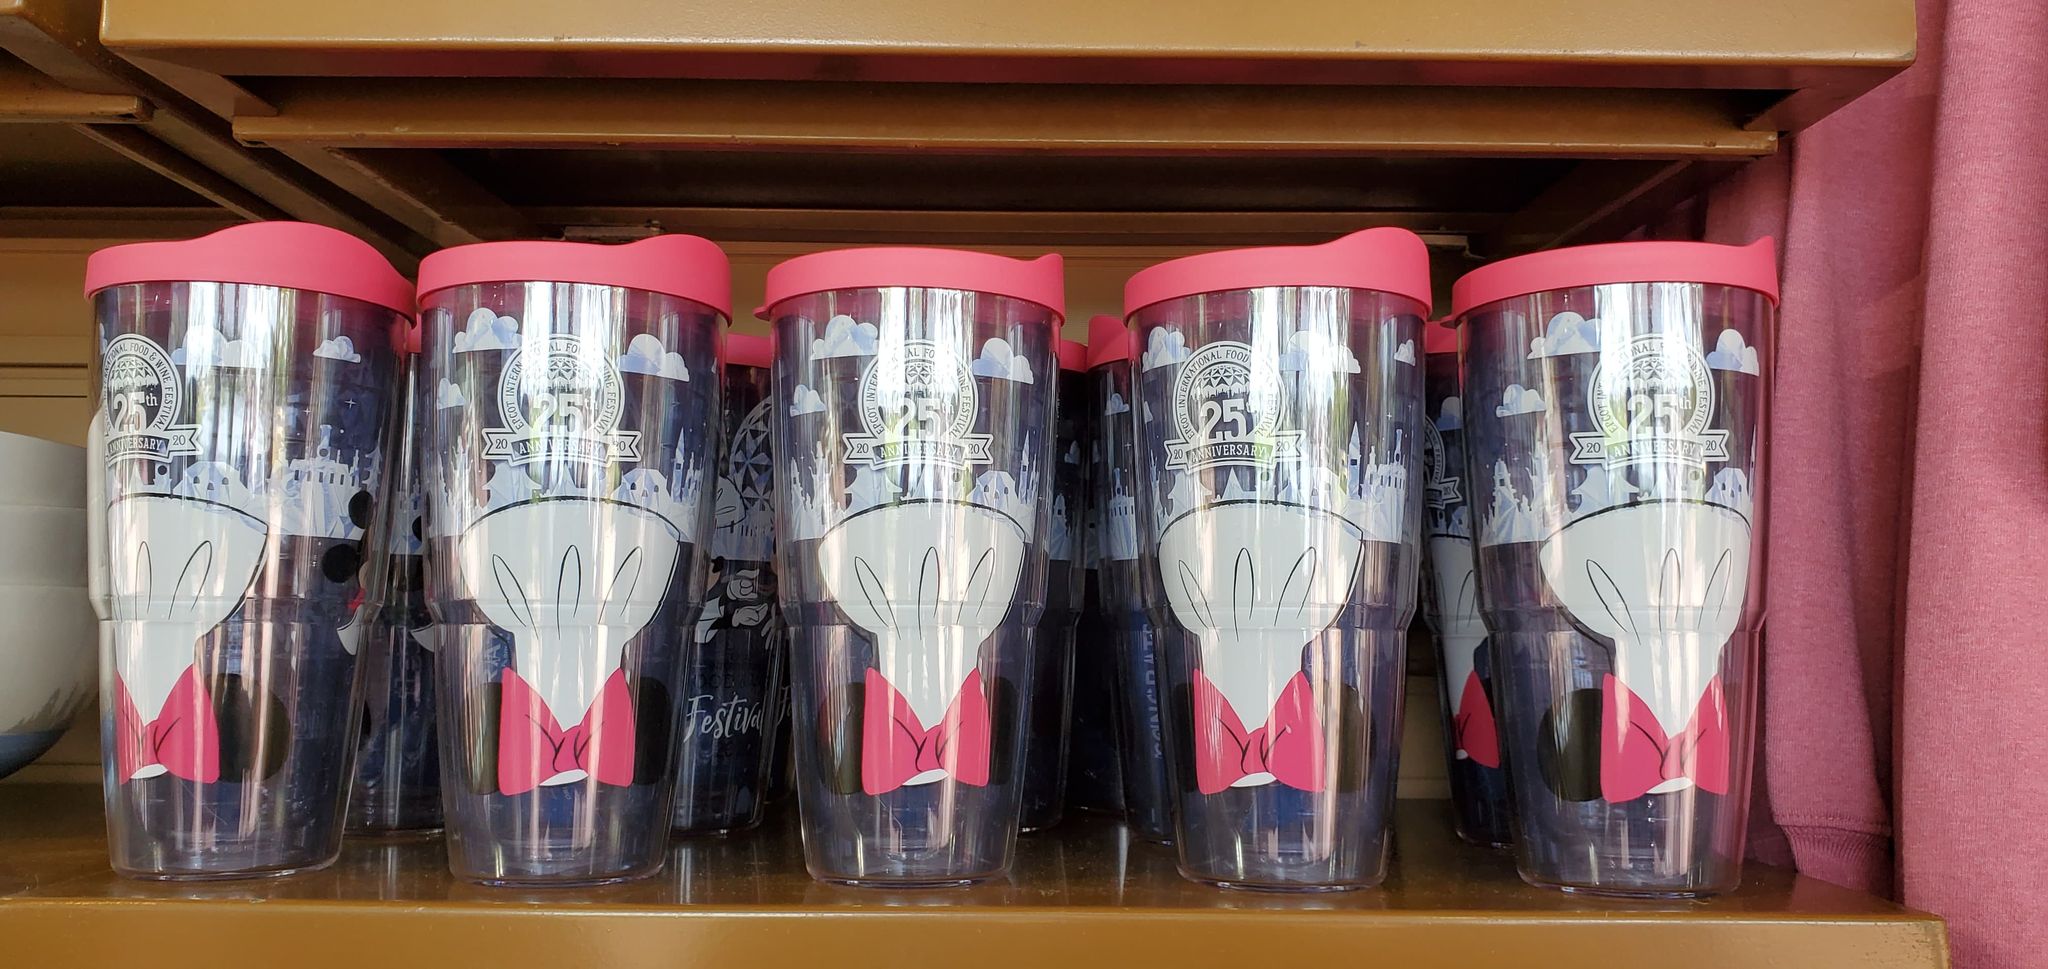 Take A Closer Look At This Year's Food And Wine Festival Merchandise